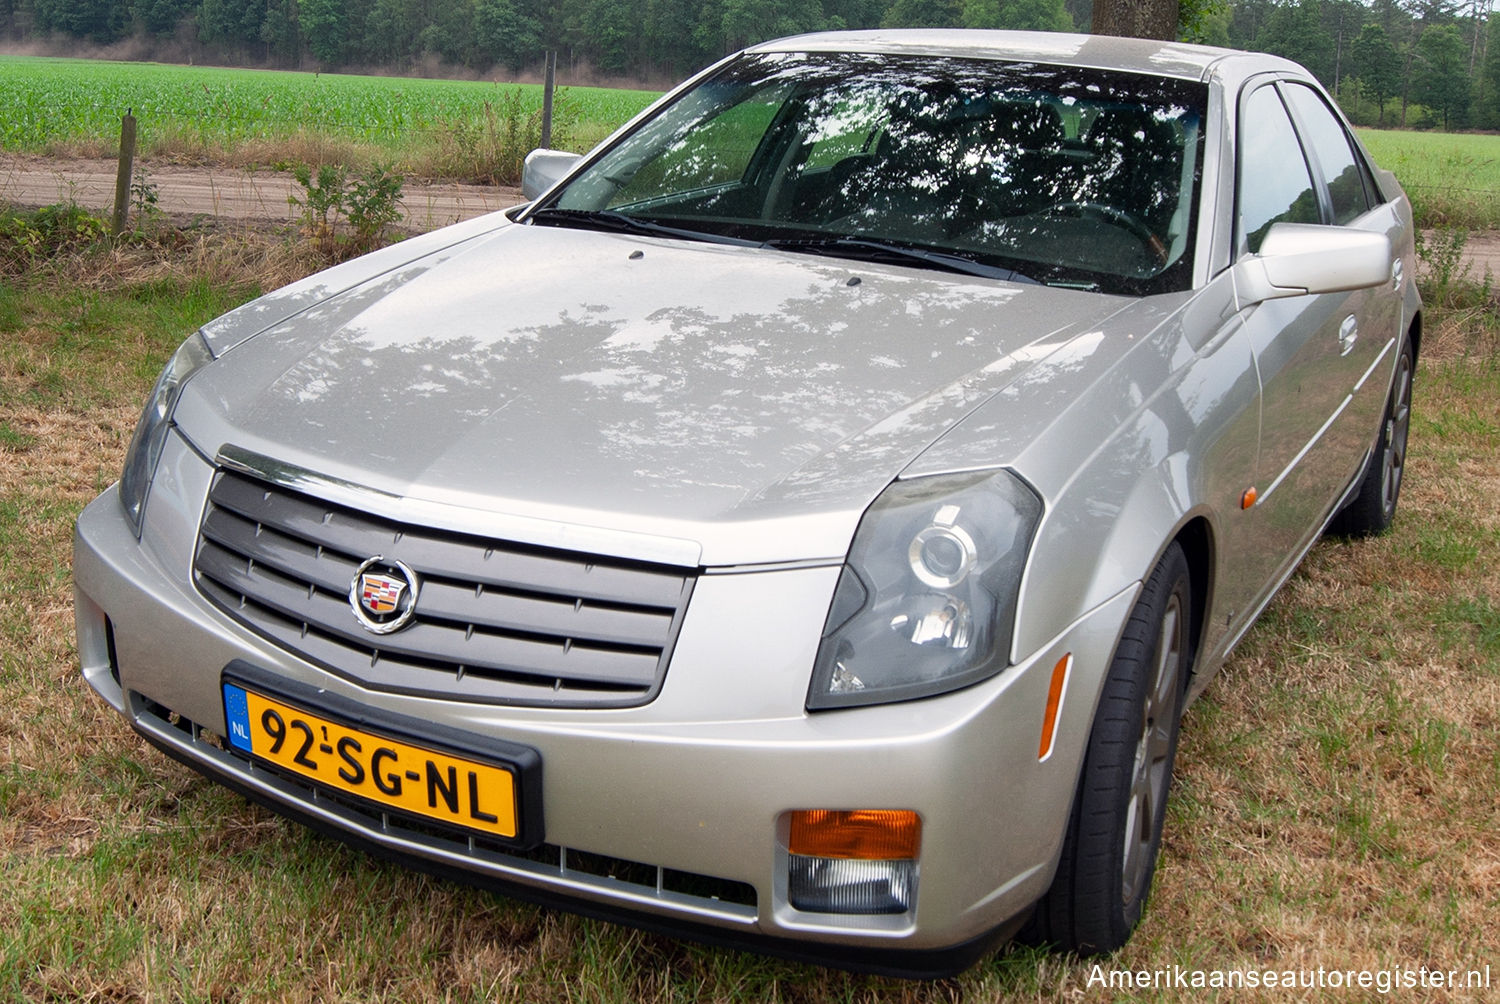 Cadillac CTS uit 2003